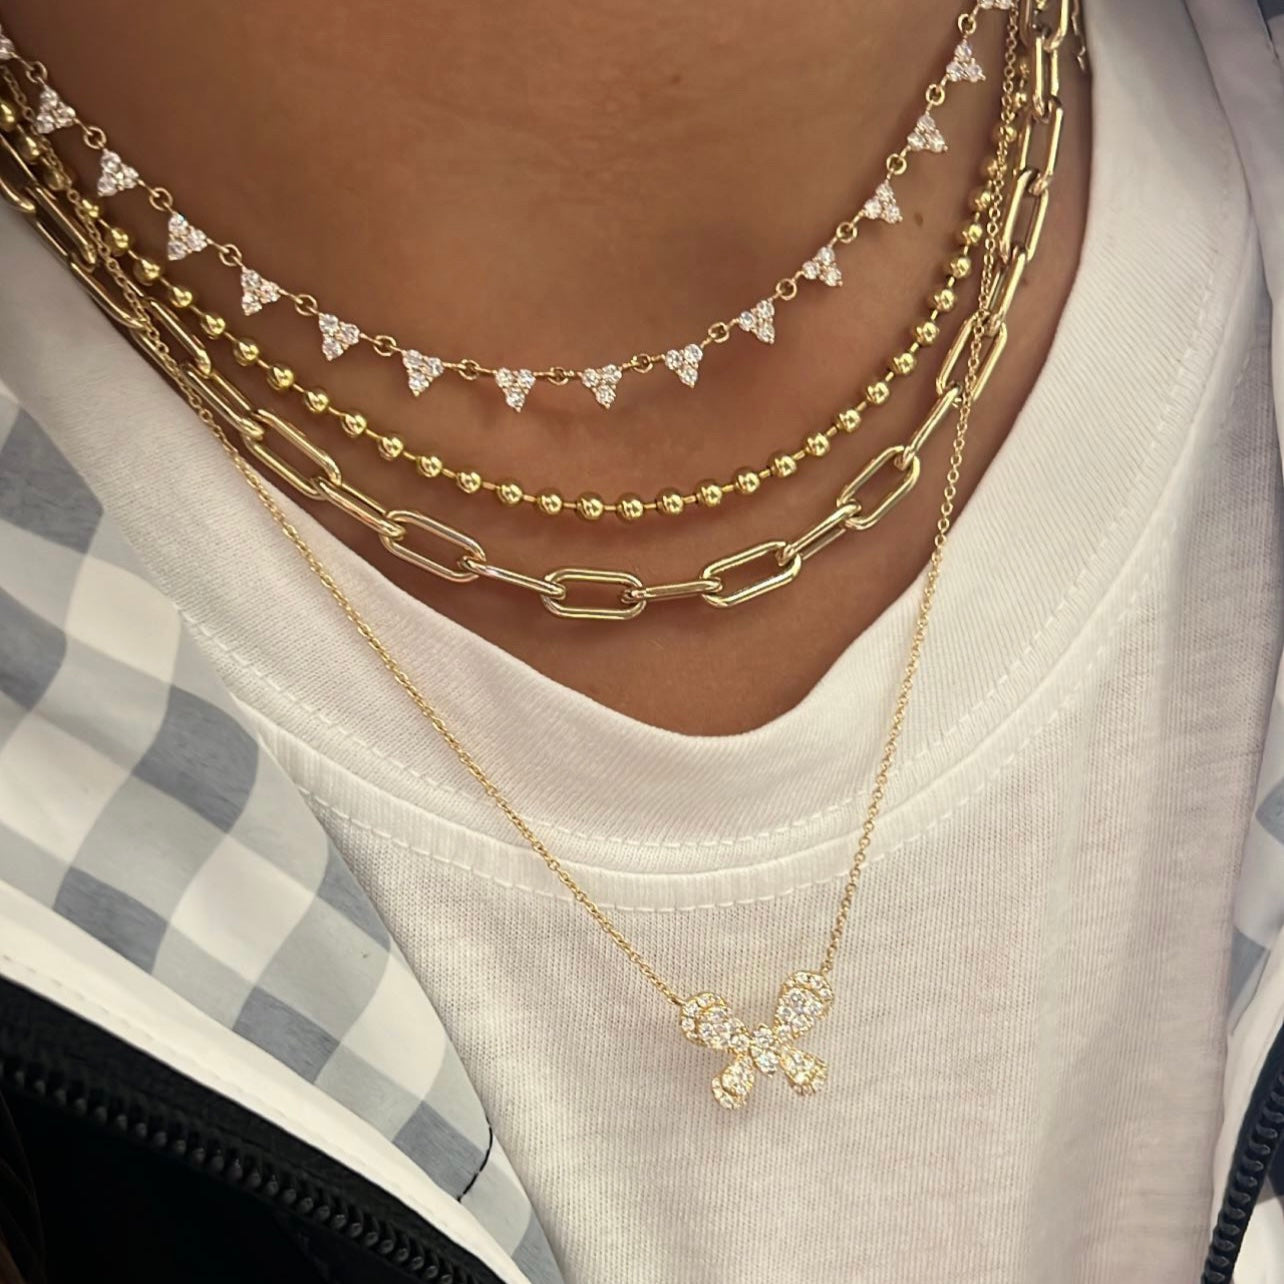 15 Station Triangle Diamond Chain Necklace